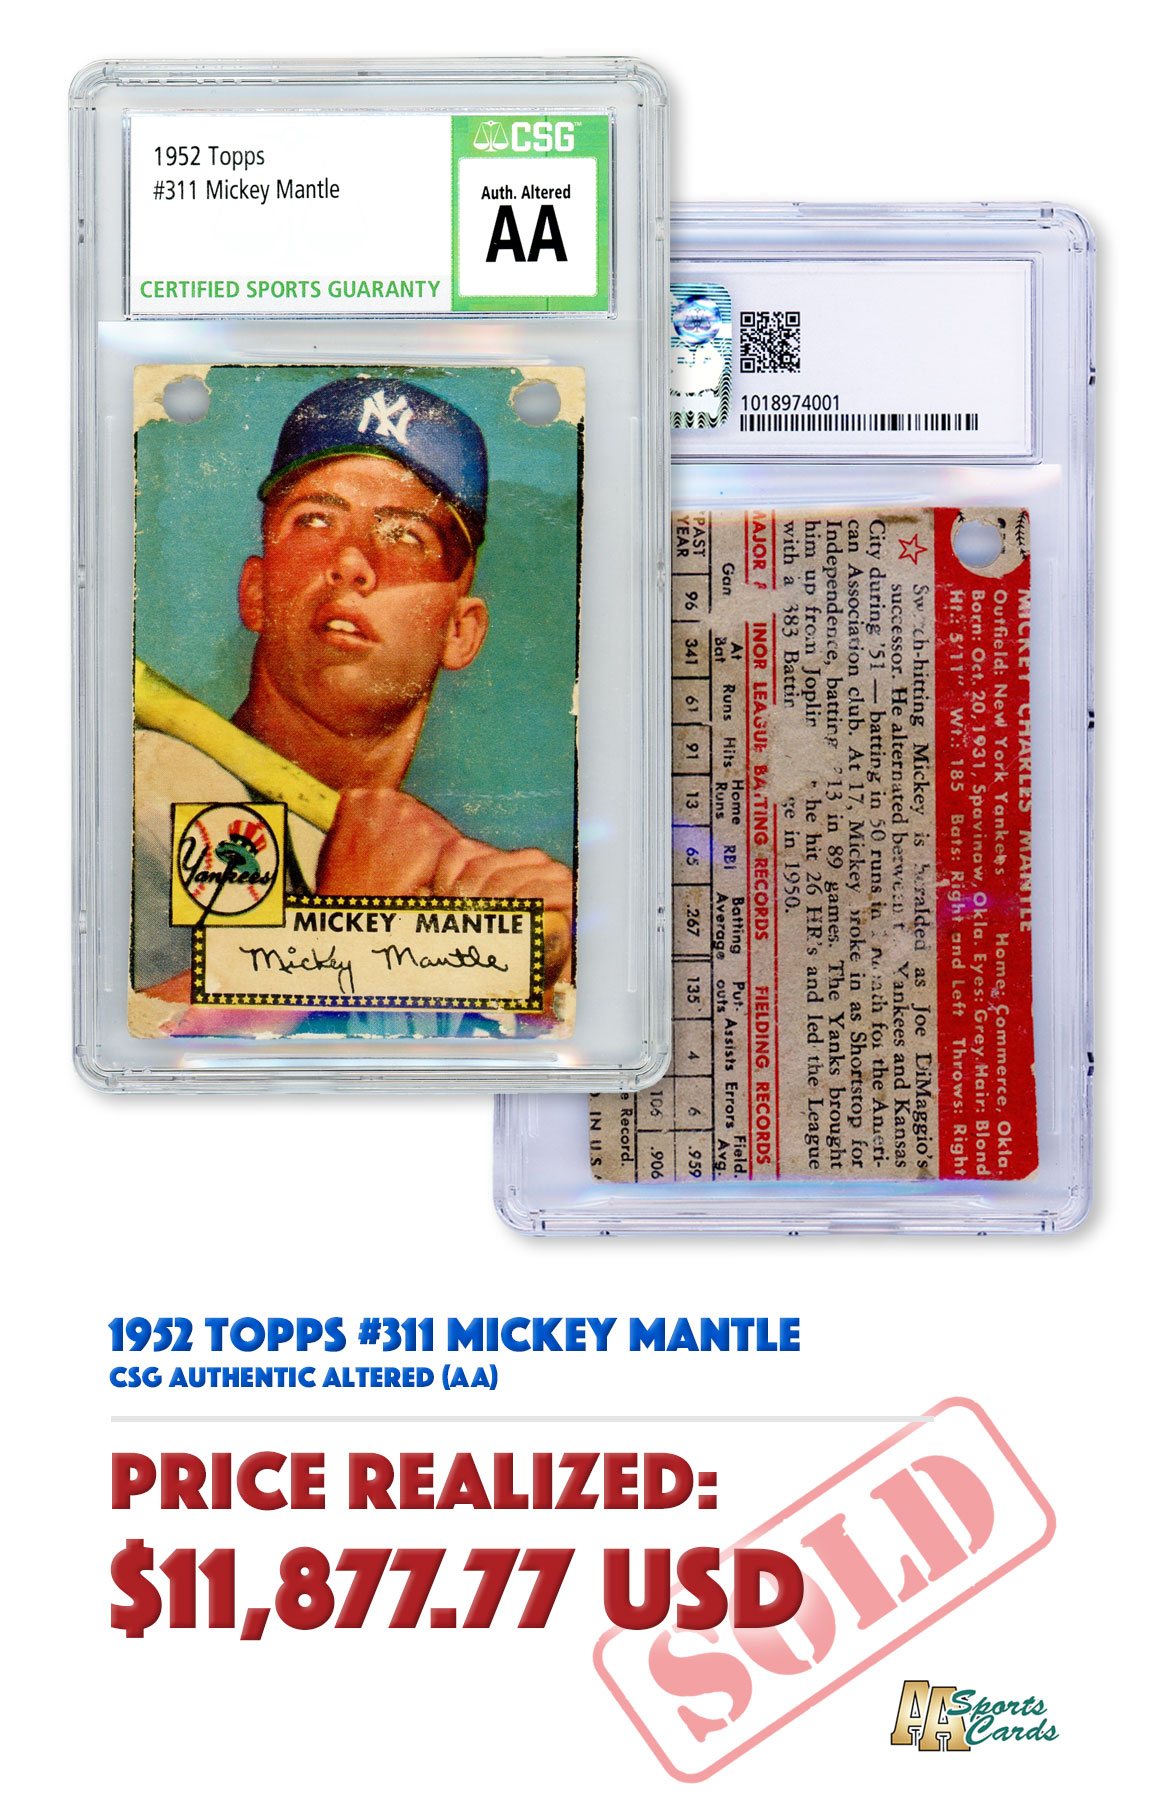 The Best 1958 Topps Baseball Cards – Highest Selling Prices